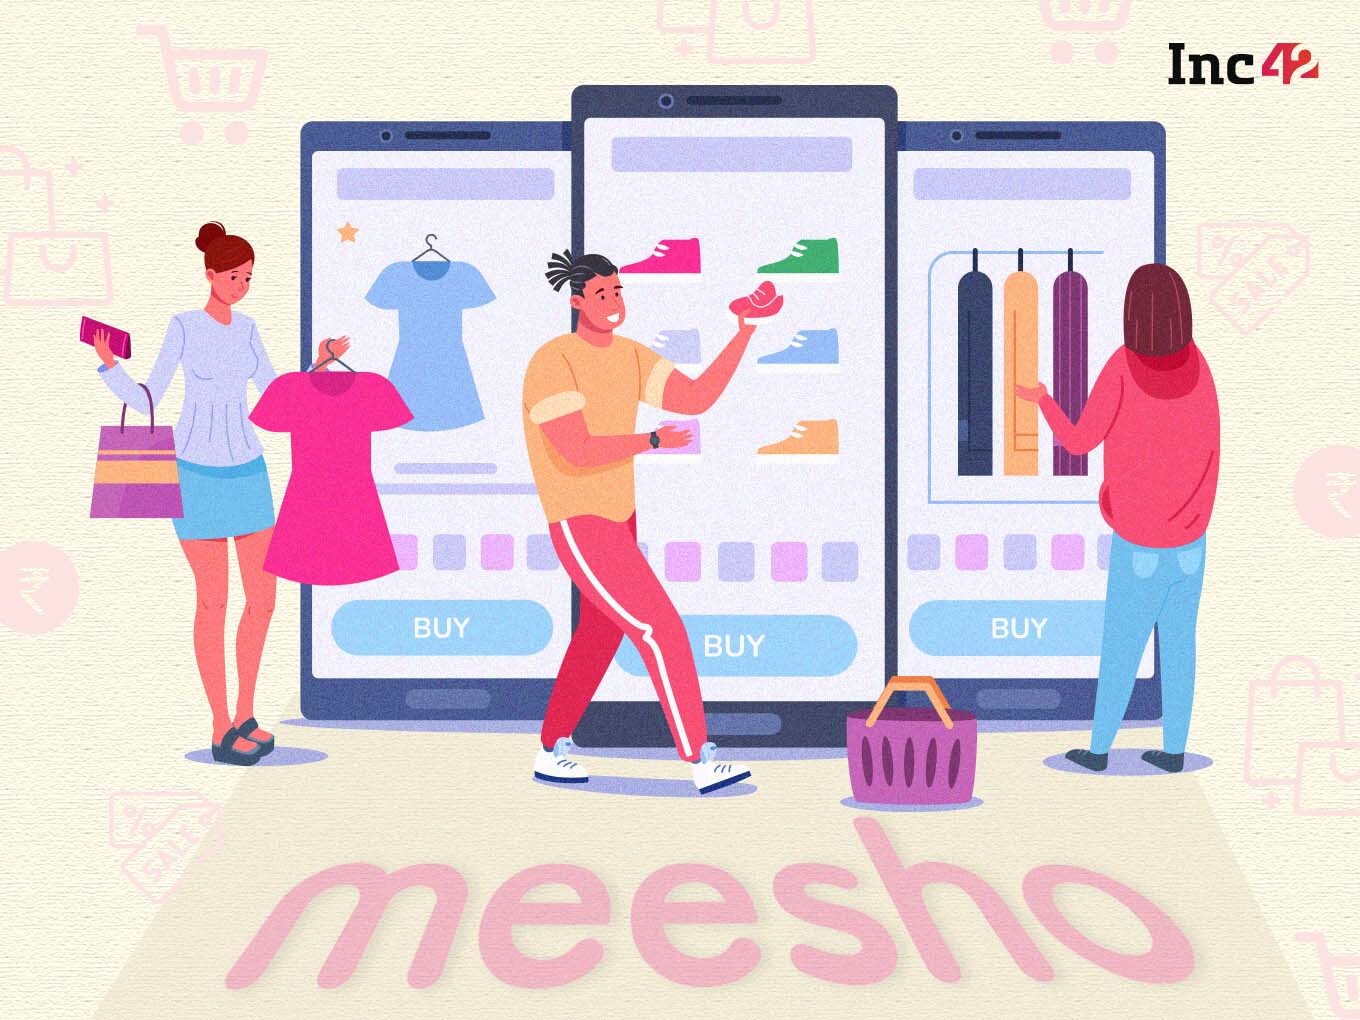 Valued At $5 Bn, Meesho's Losses Near INR 500 Cr In FY21 After 2X Surge In Expenses